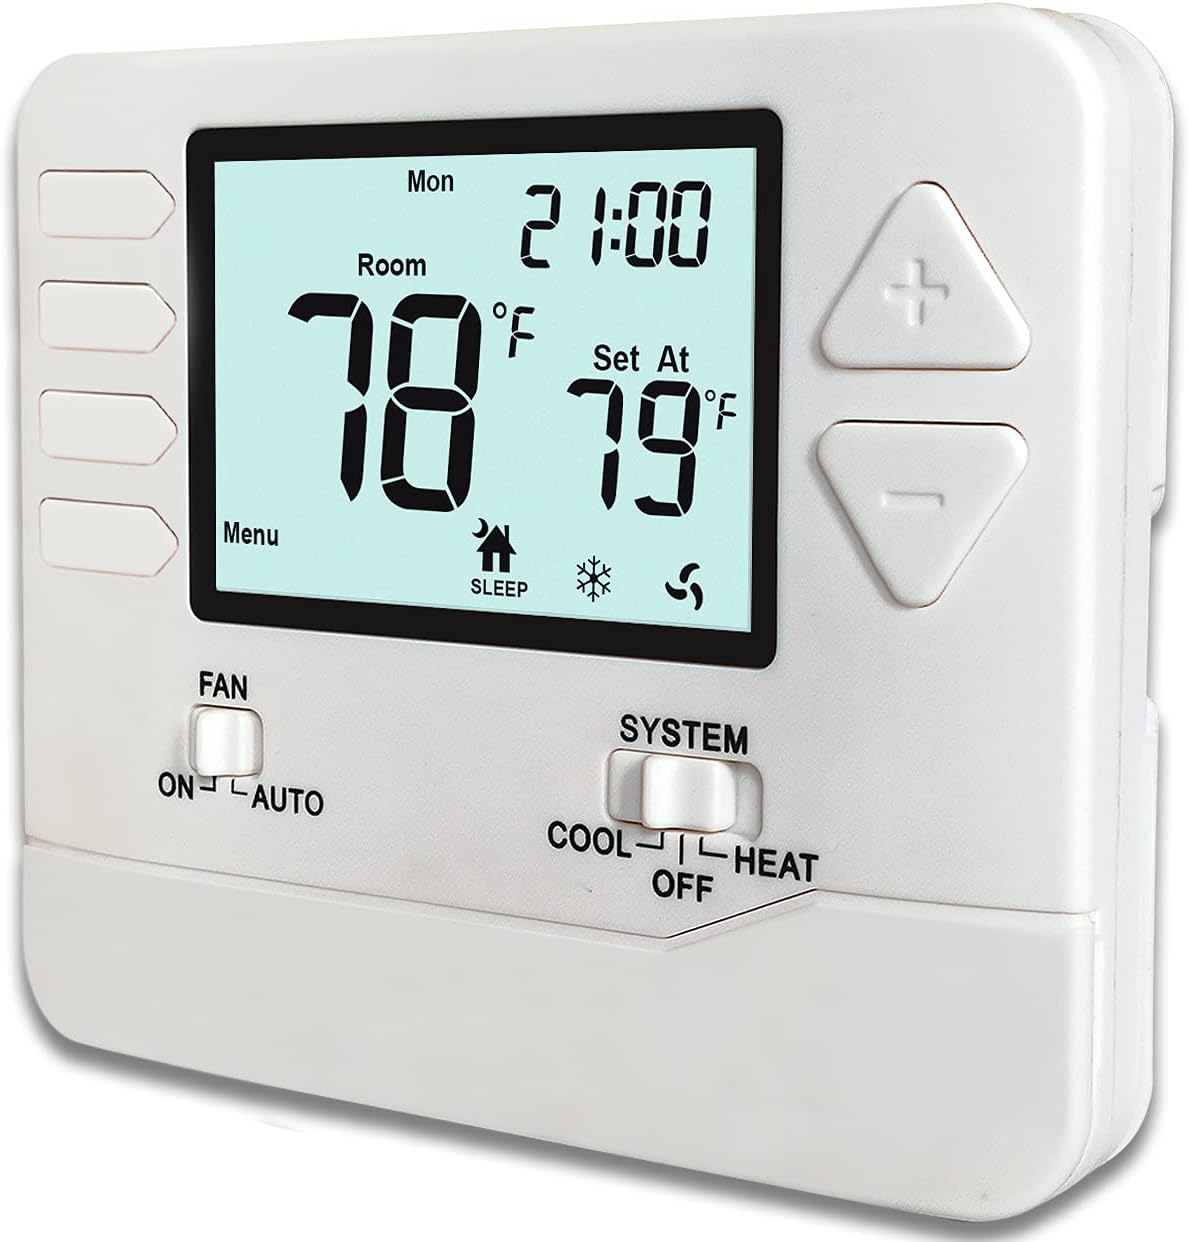 Heagstat H715 5-1-1-Day Multi Stage Programmable Thermostat, 2 Heat/2 Cool, with 4.5 sq. Inch Display